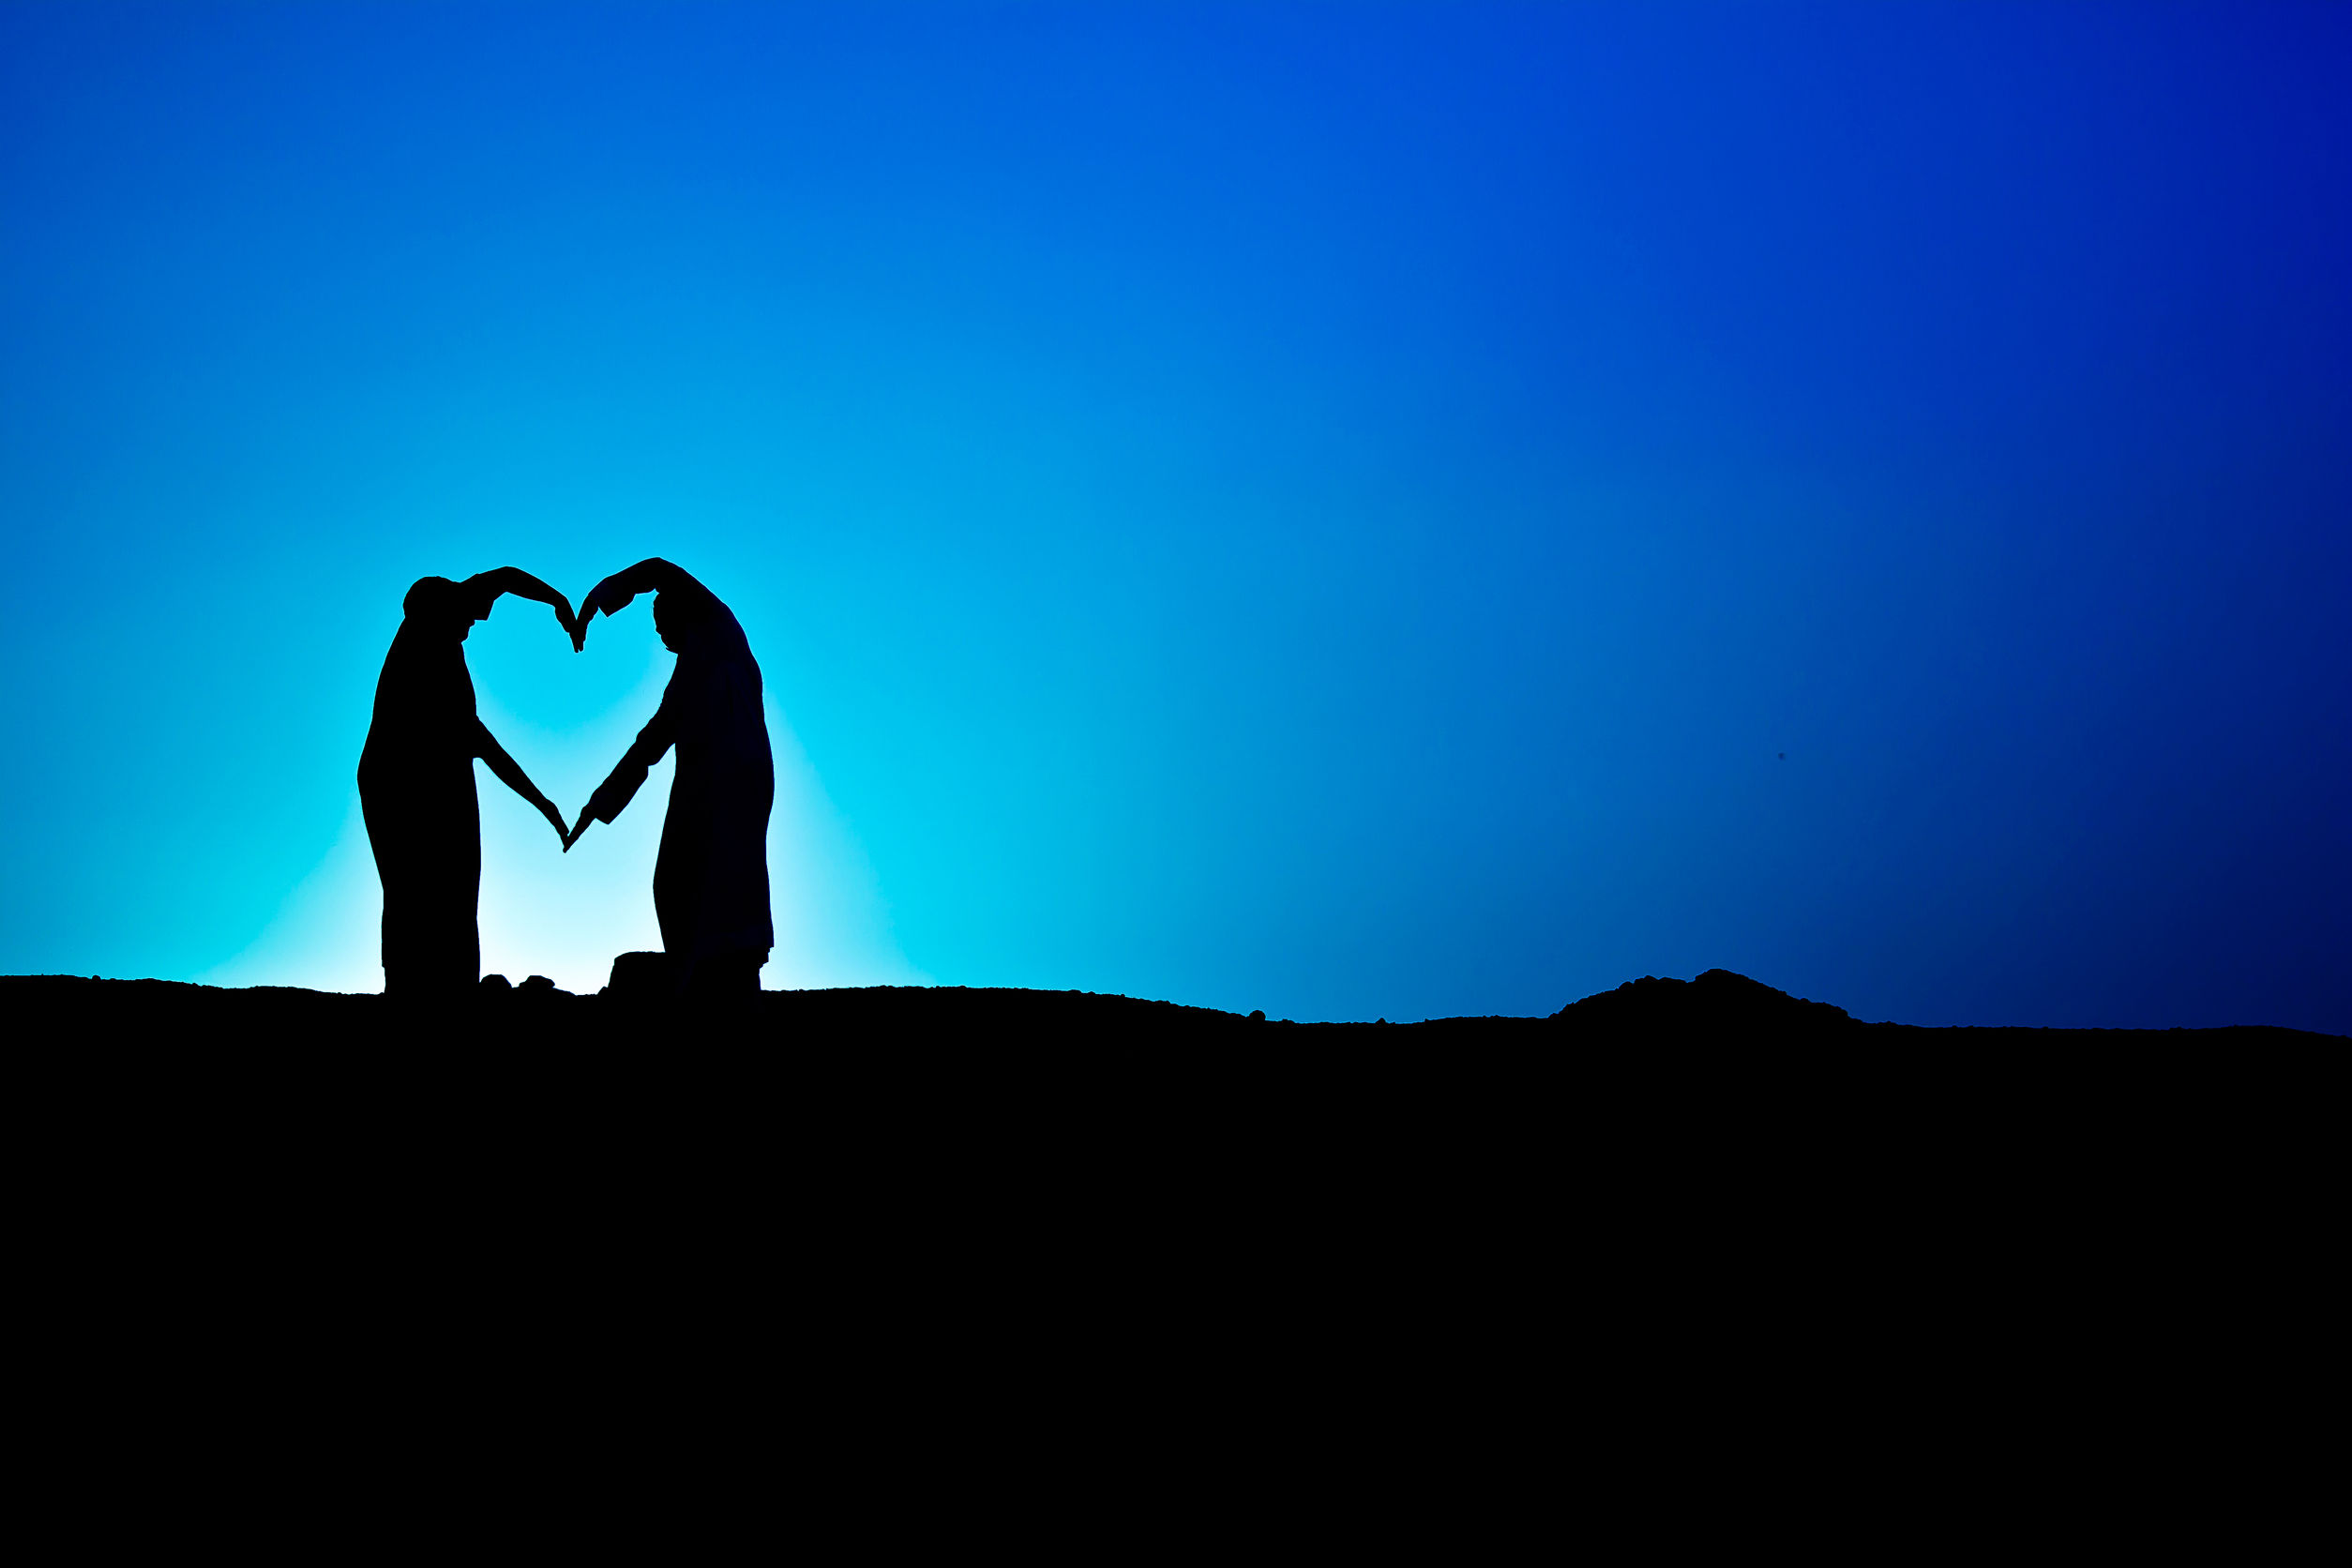 61861741 - conceptual heart shape, symbol of human. woman and man hand silhouette over sky at sunset background, metaphor to love, valentine day, romantic, couple, wedding, romance, summer or sunrise